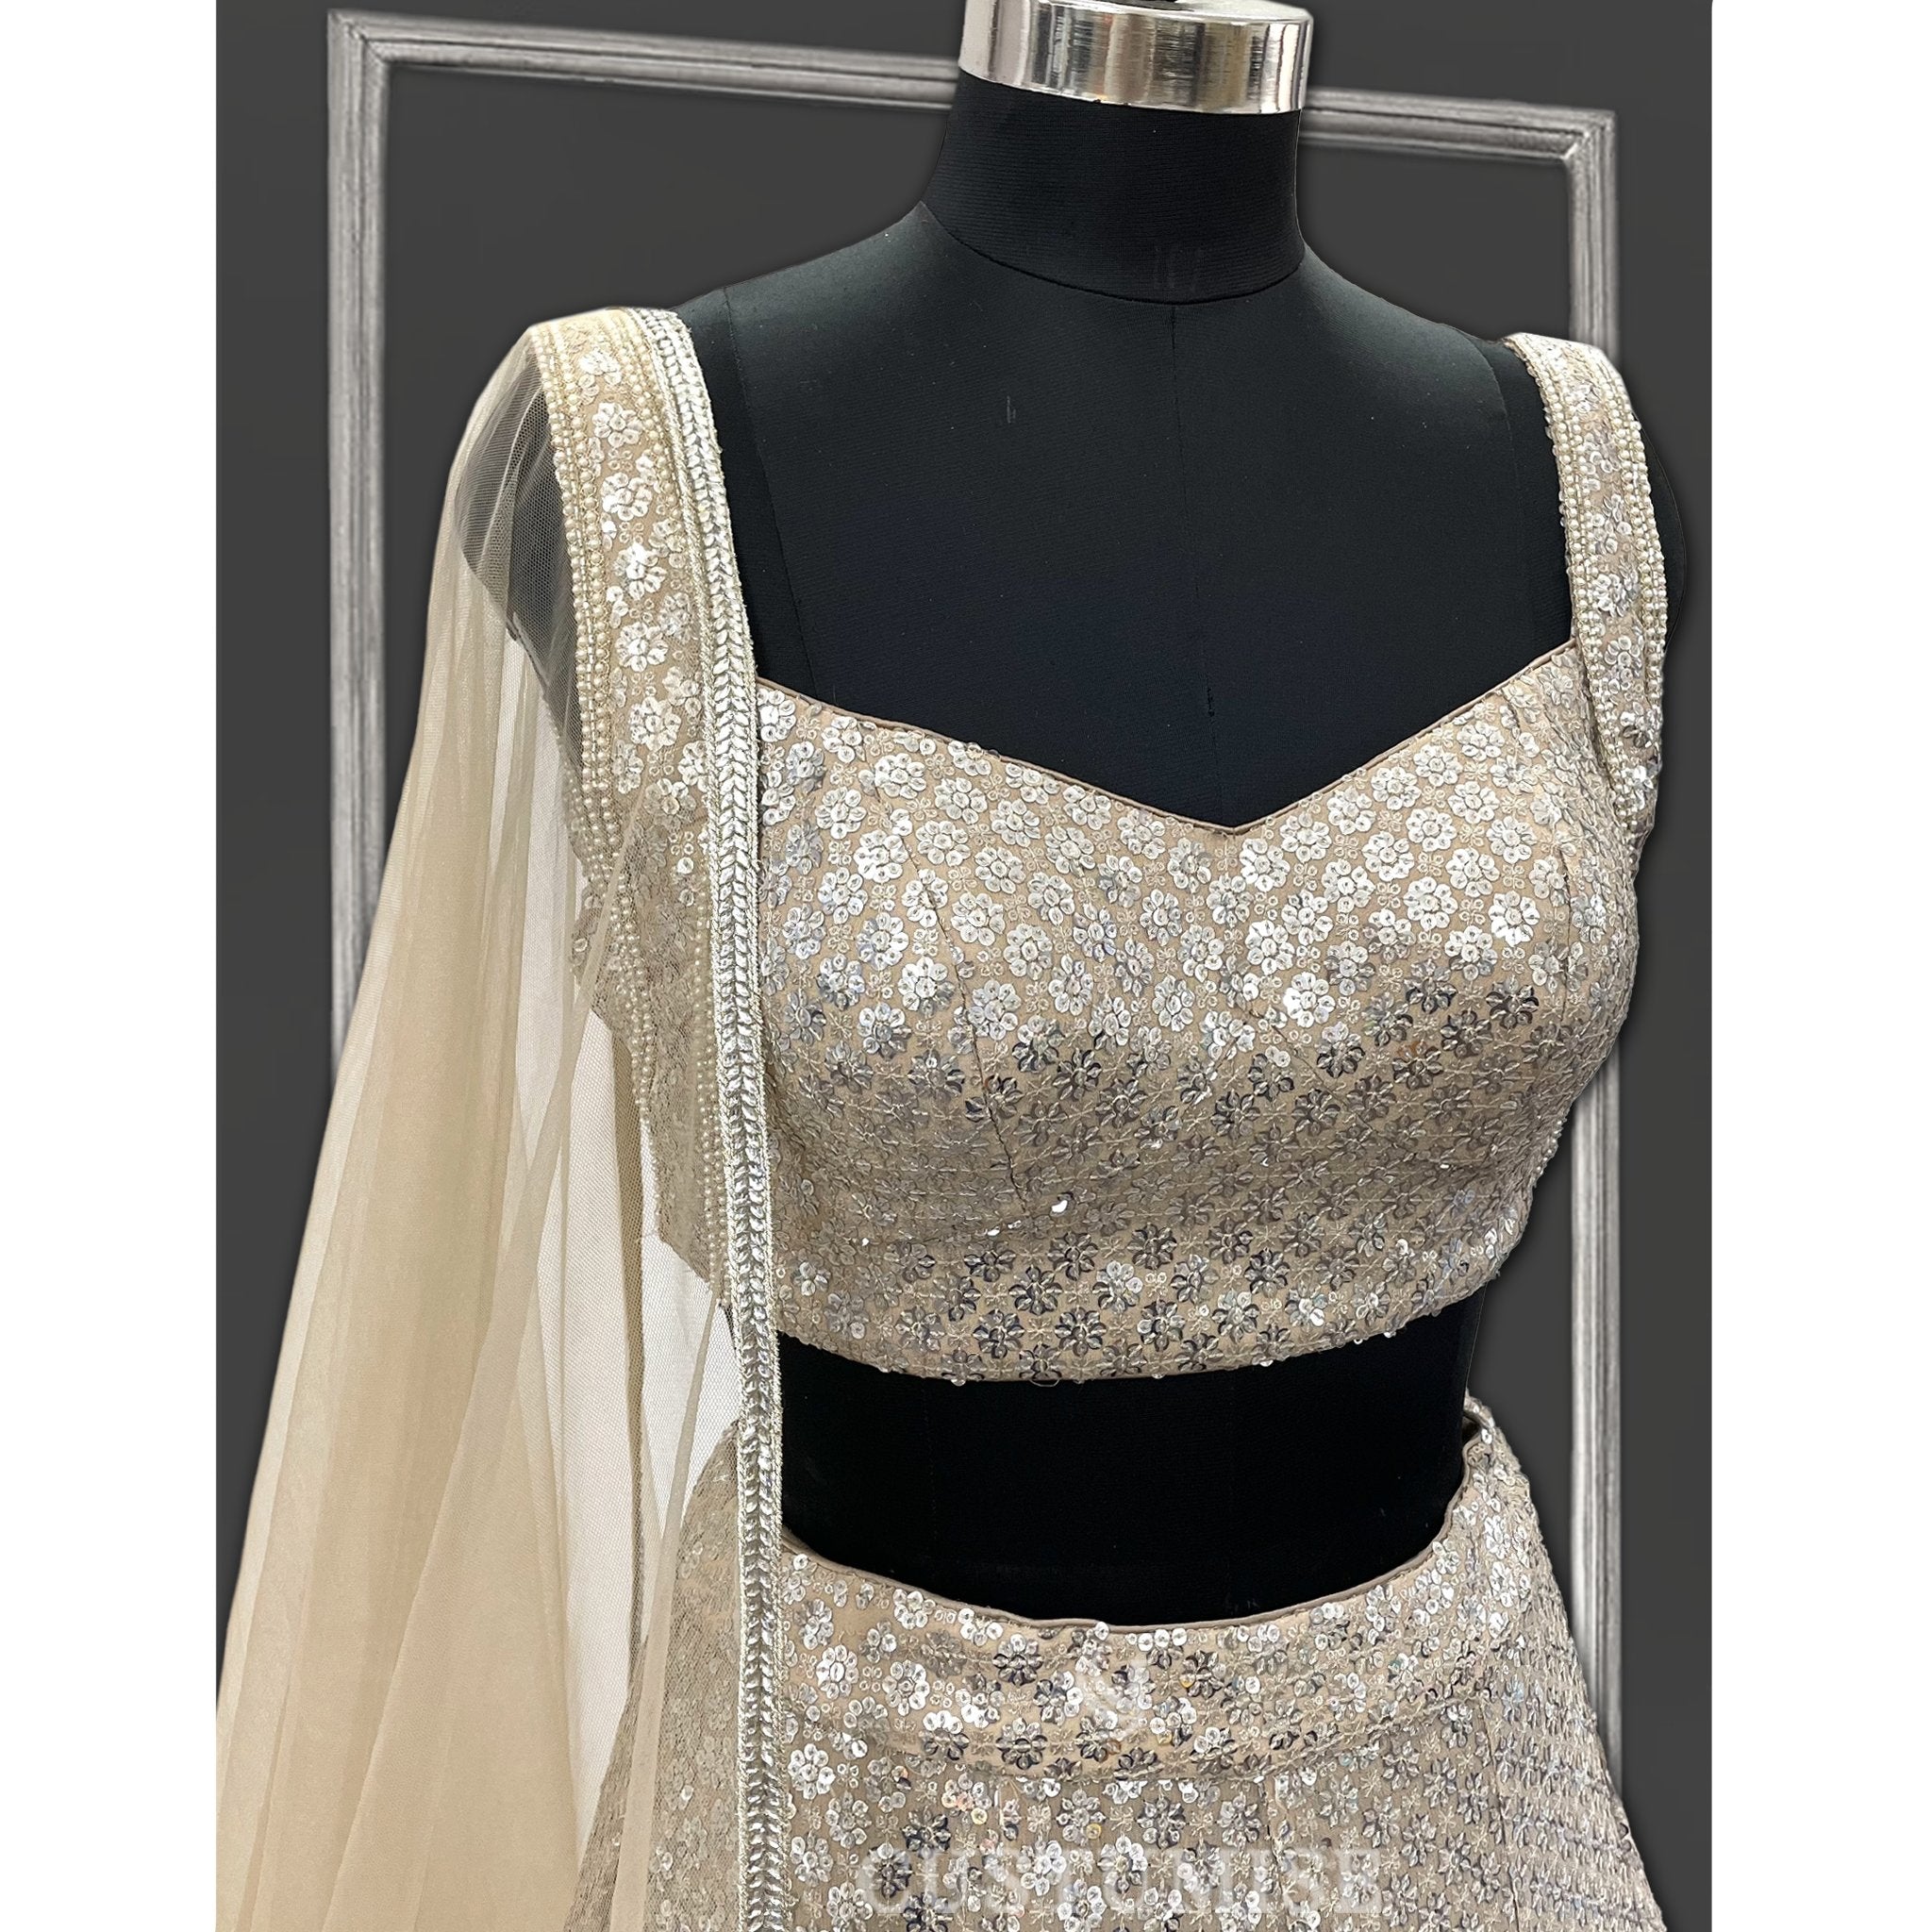 Champagne gold & Silver Sequence Embroidered Lehenga - Indian Designer Bridal Wedding Outfit